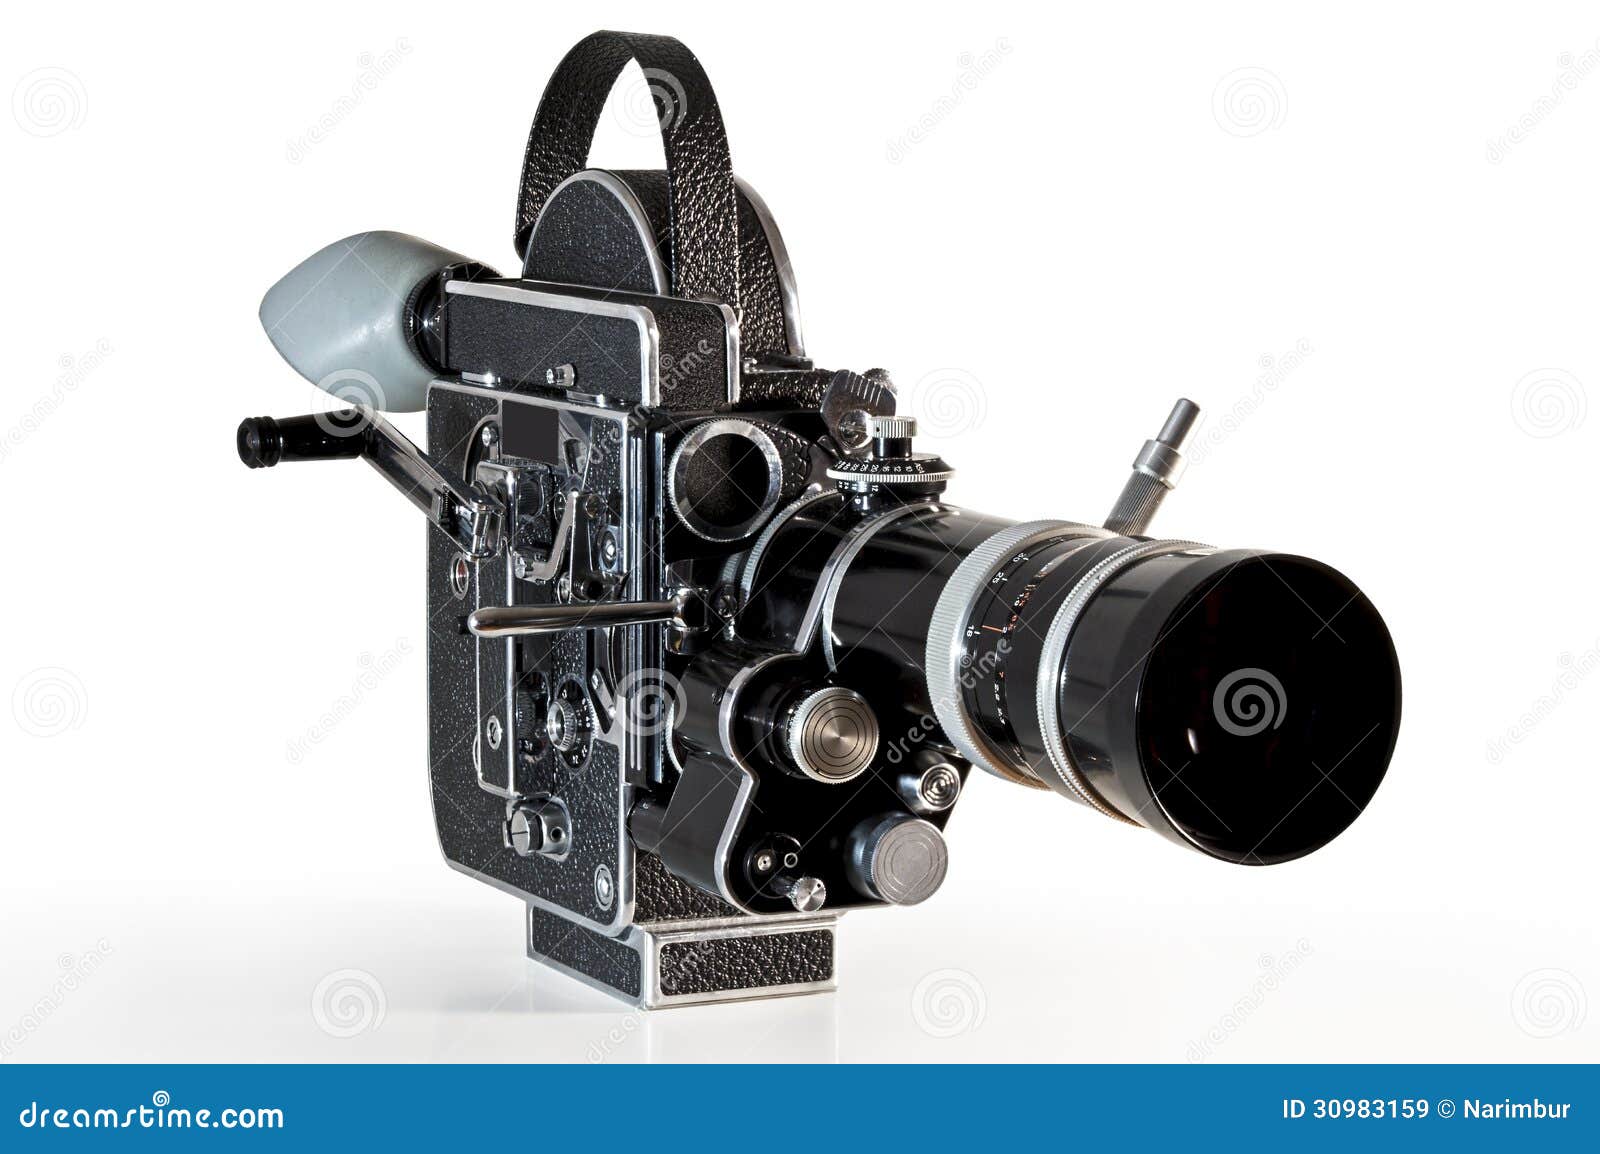 Vintage film camera stock image. Image of collection - 30983159